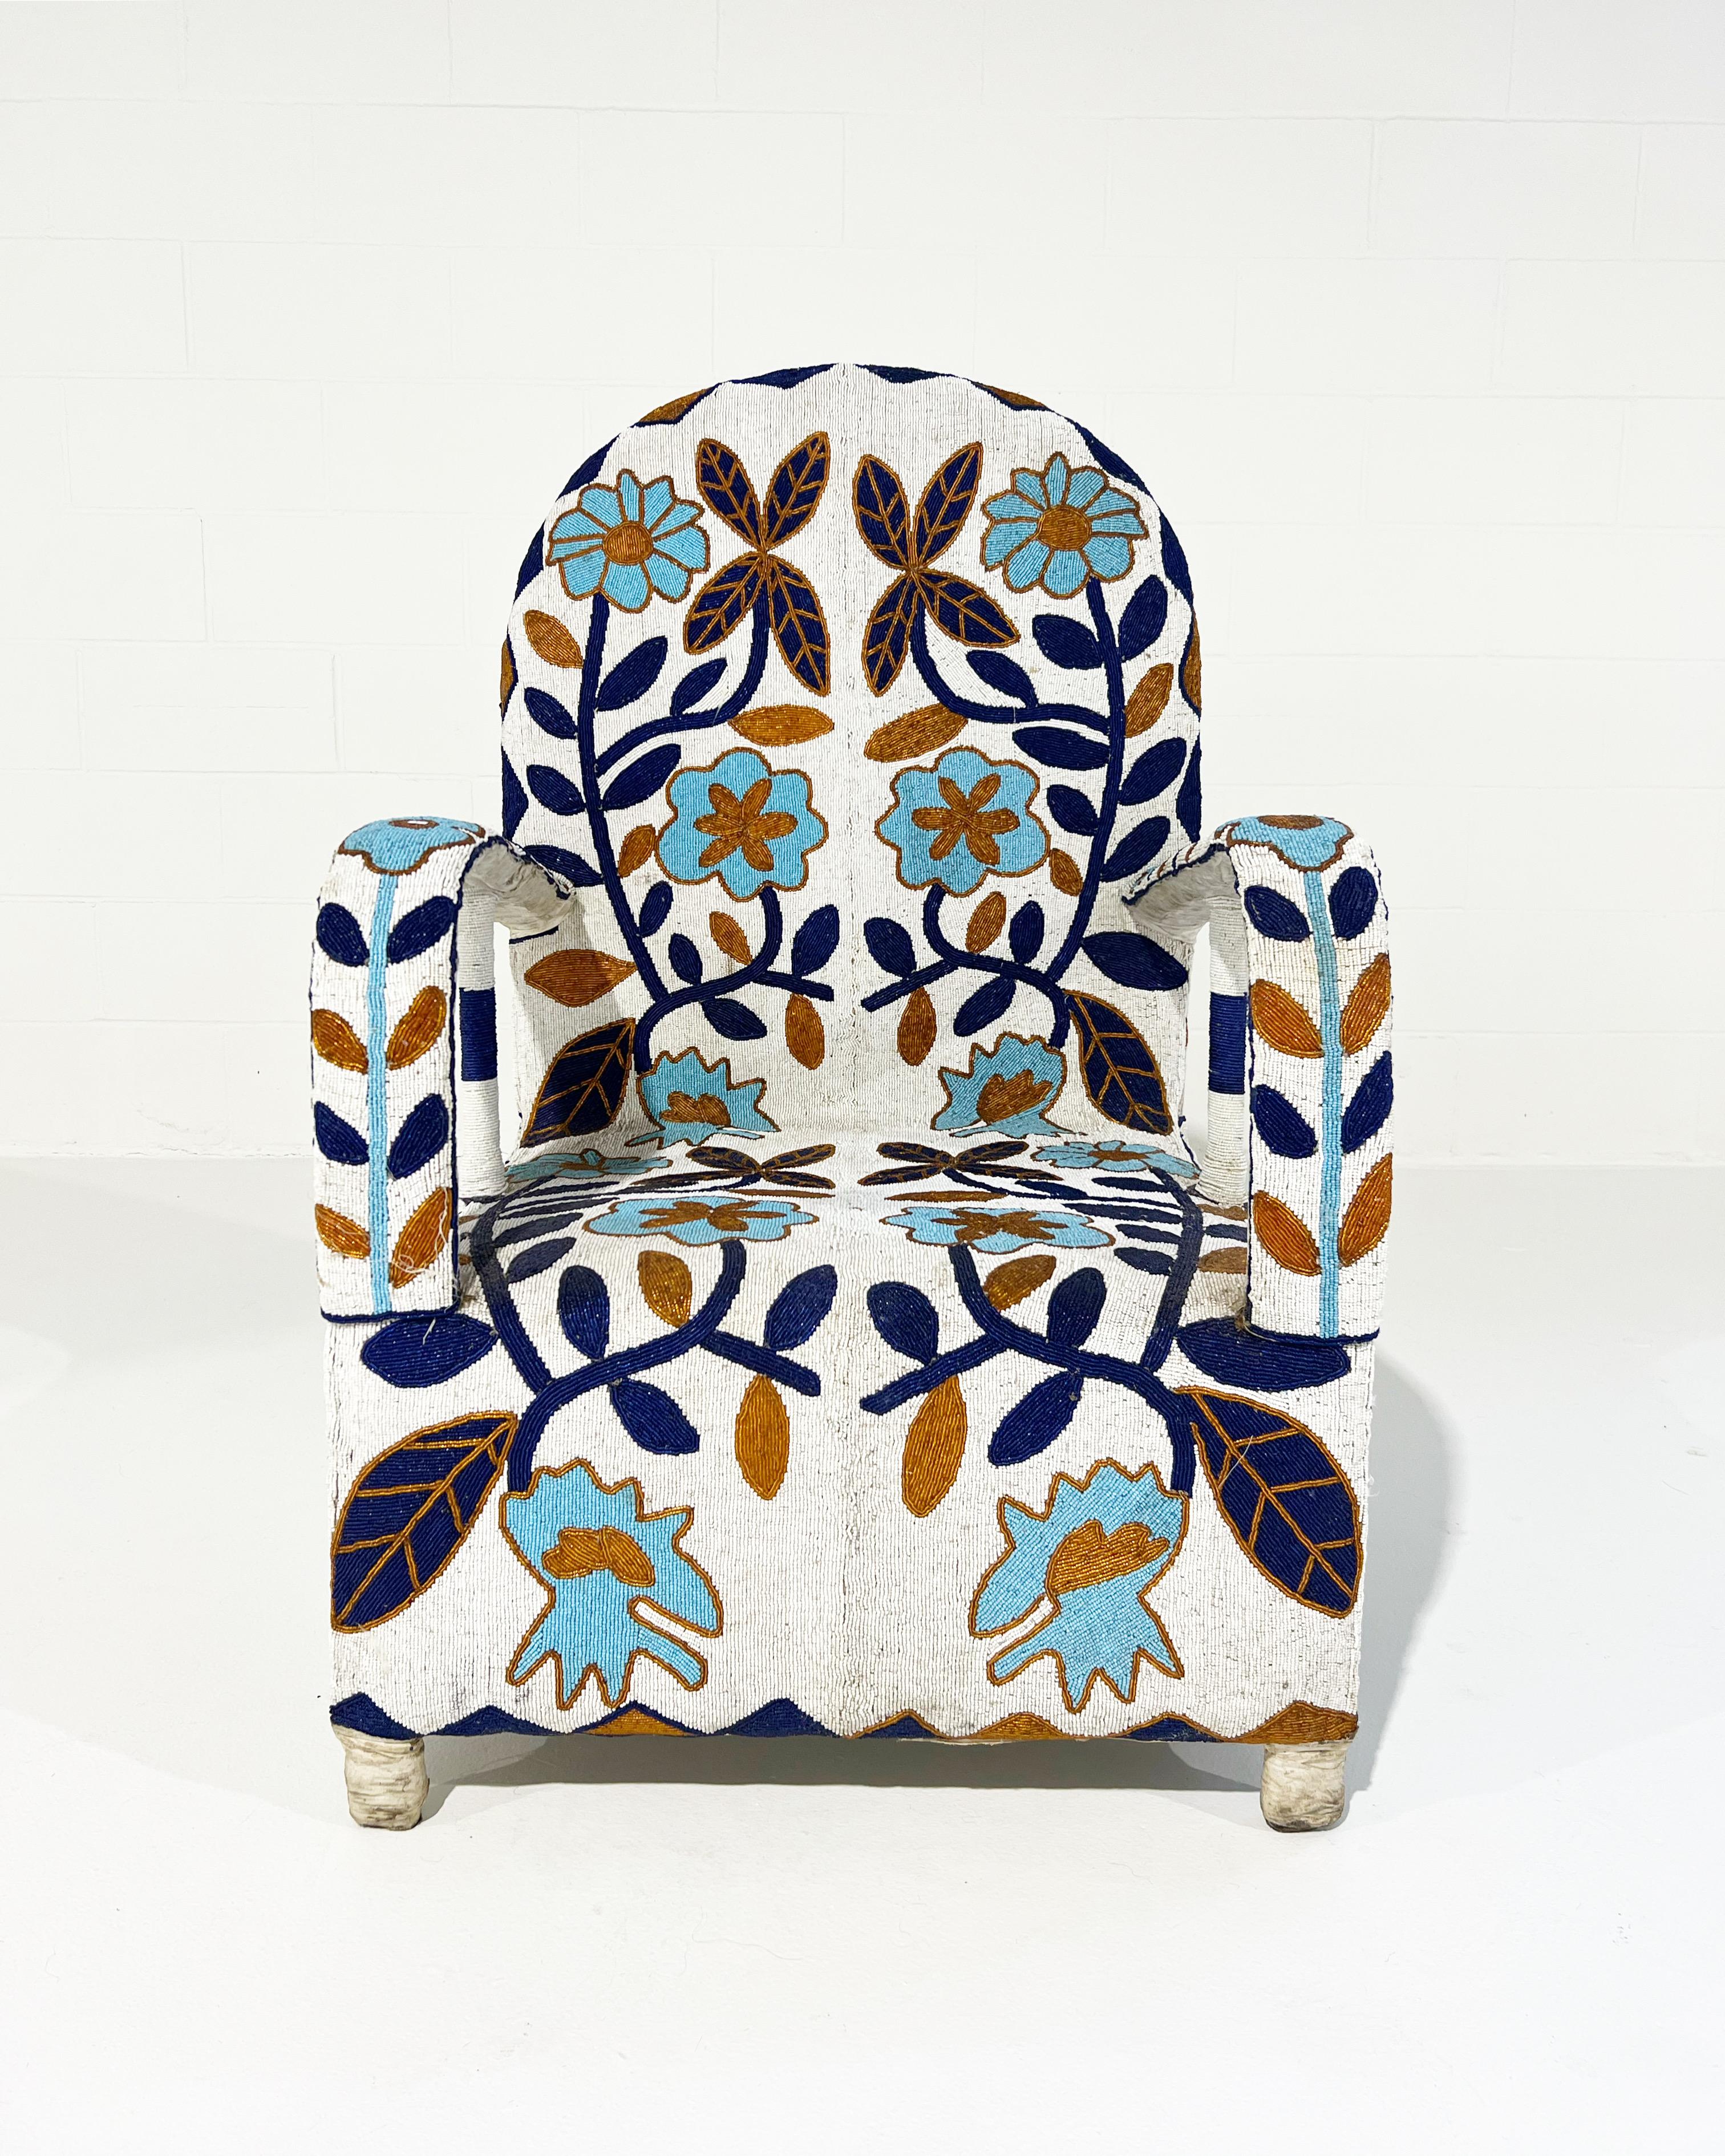 Description
Originally handcrafted for the Nigerian Yoruba Tribe kings and queens, each chair takes approximately 3 months to make. Thousands of tiny glass beads are intricately applied to canvas fabric in beautiful shapes and designs. The fabric is